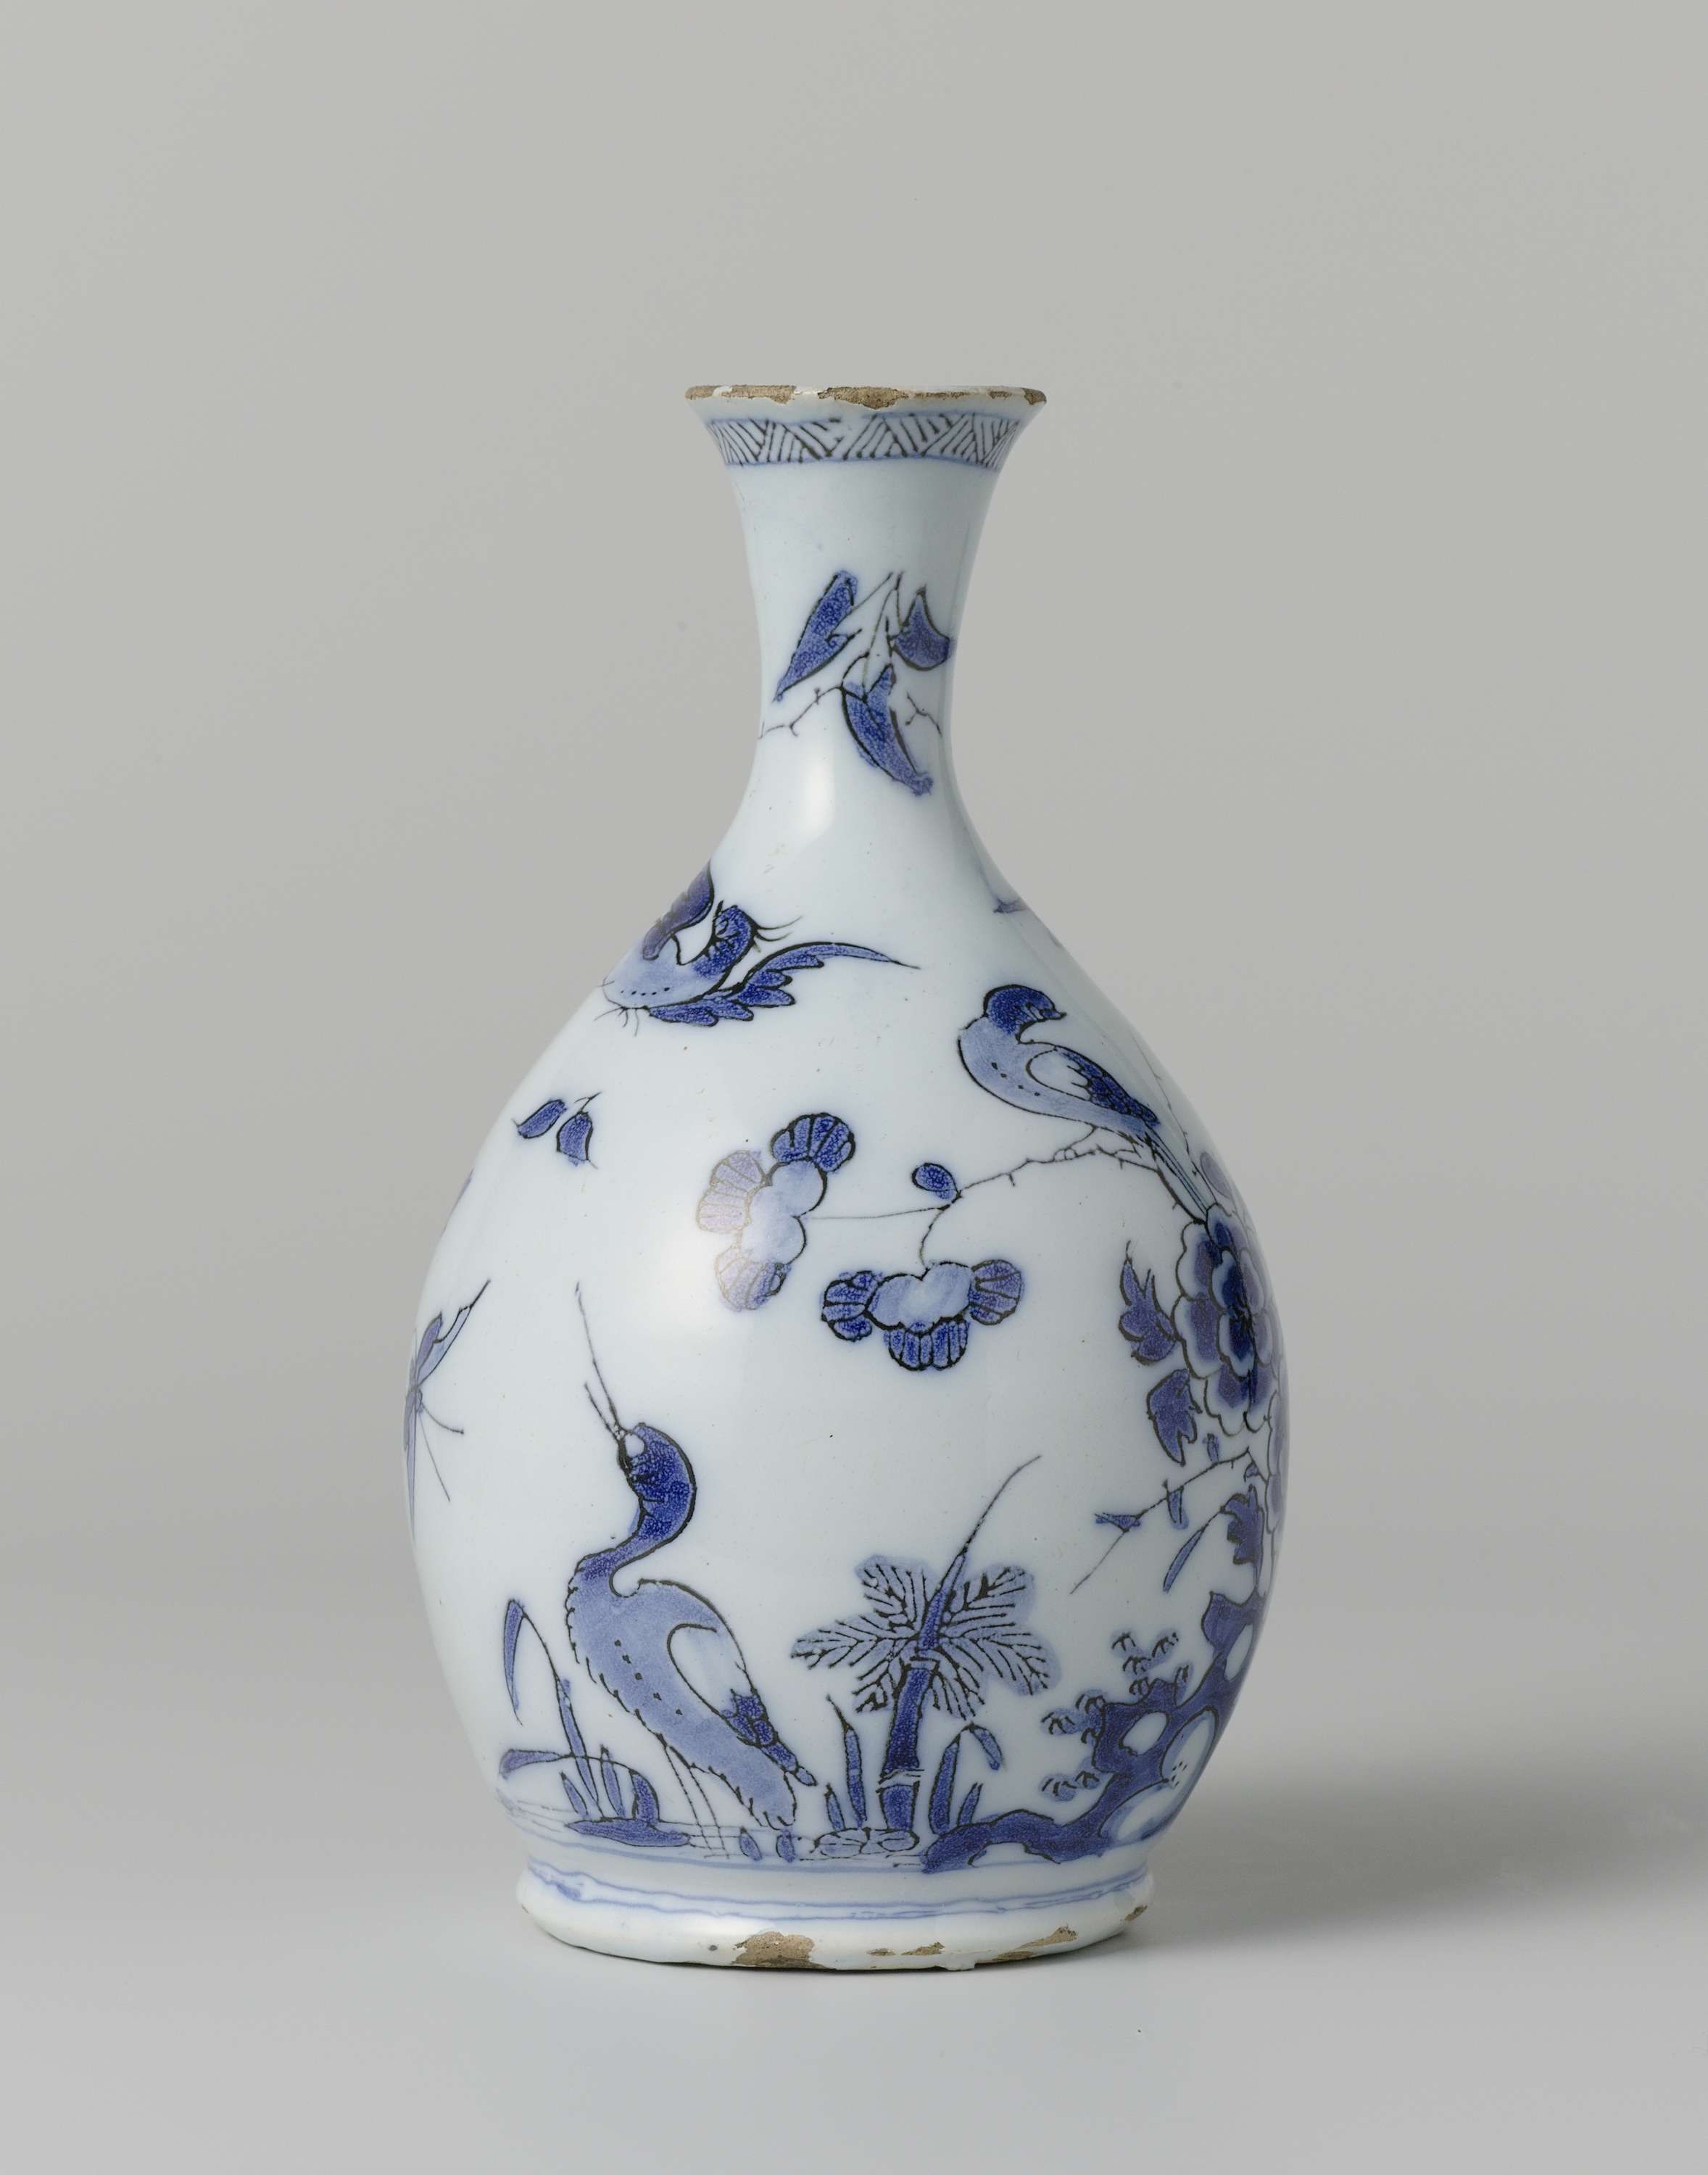 26 attractive Chinese Blue White Vase 2024 free download chinese blue white vase of het moriaanshooft vase het moriaanshooft rochus jacobsz intended for hoppesteijn place delft dating c 1685 c 1690 faience vase with the chinese porcelain inspired 